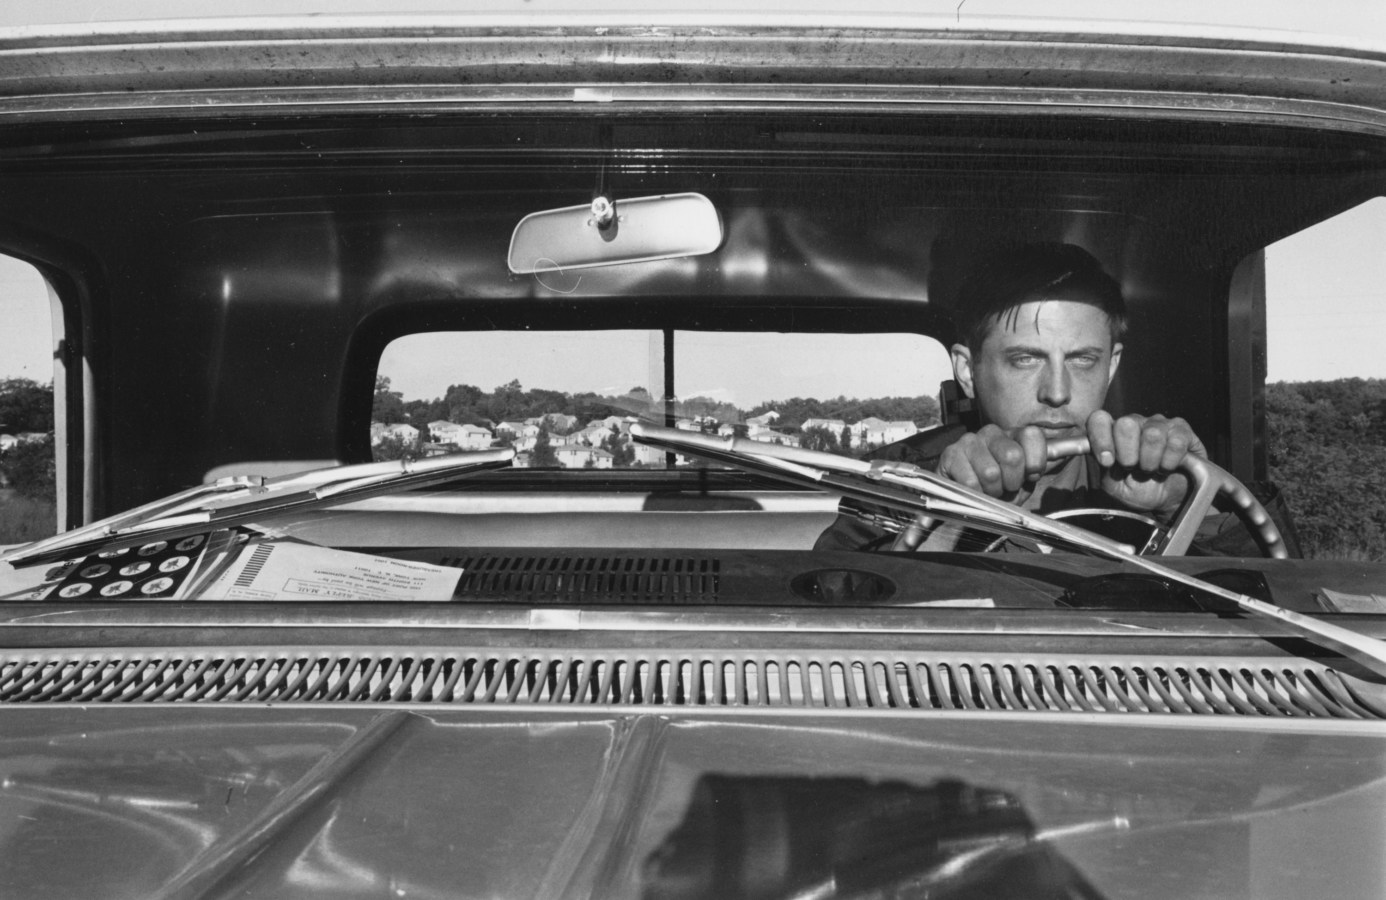 A black and white photograph of a self portrait of the artist at the wheel of a pickup truck